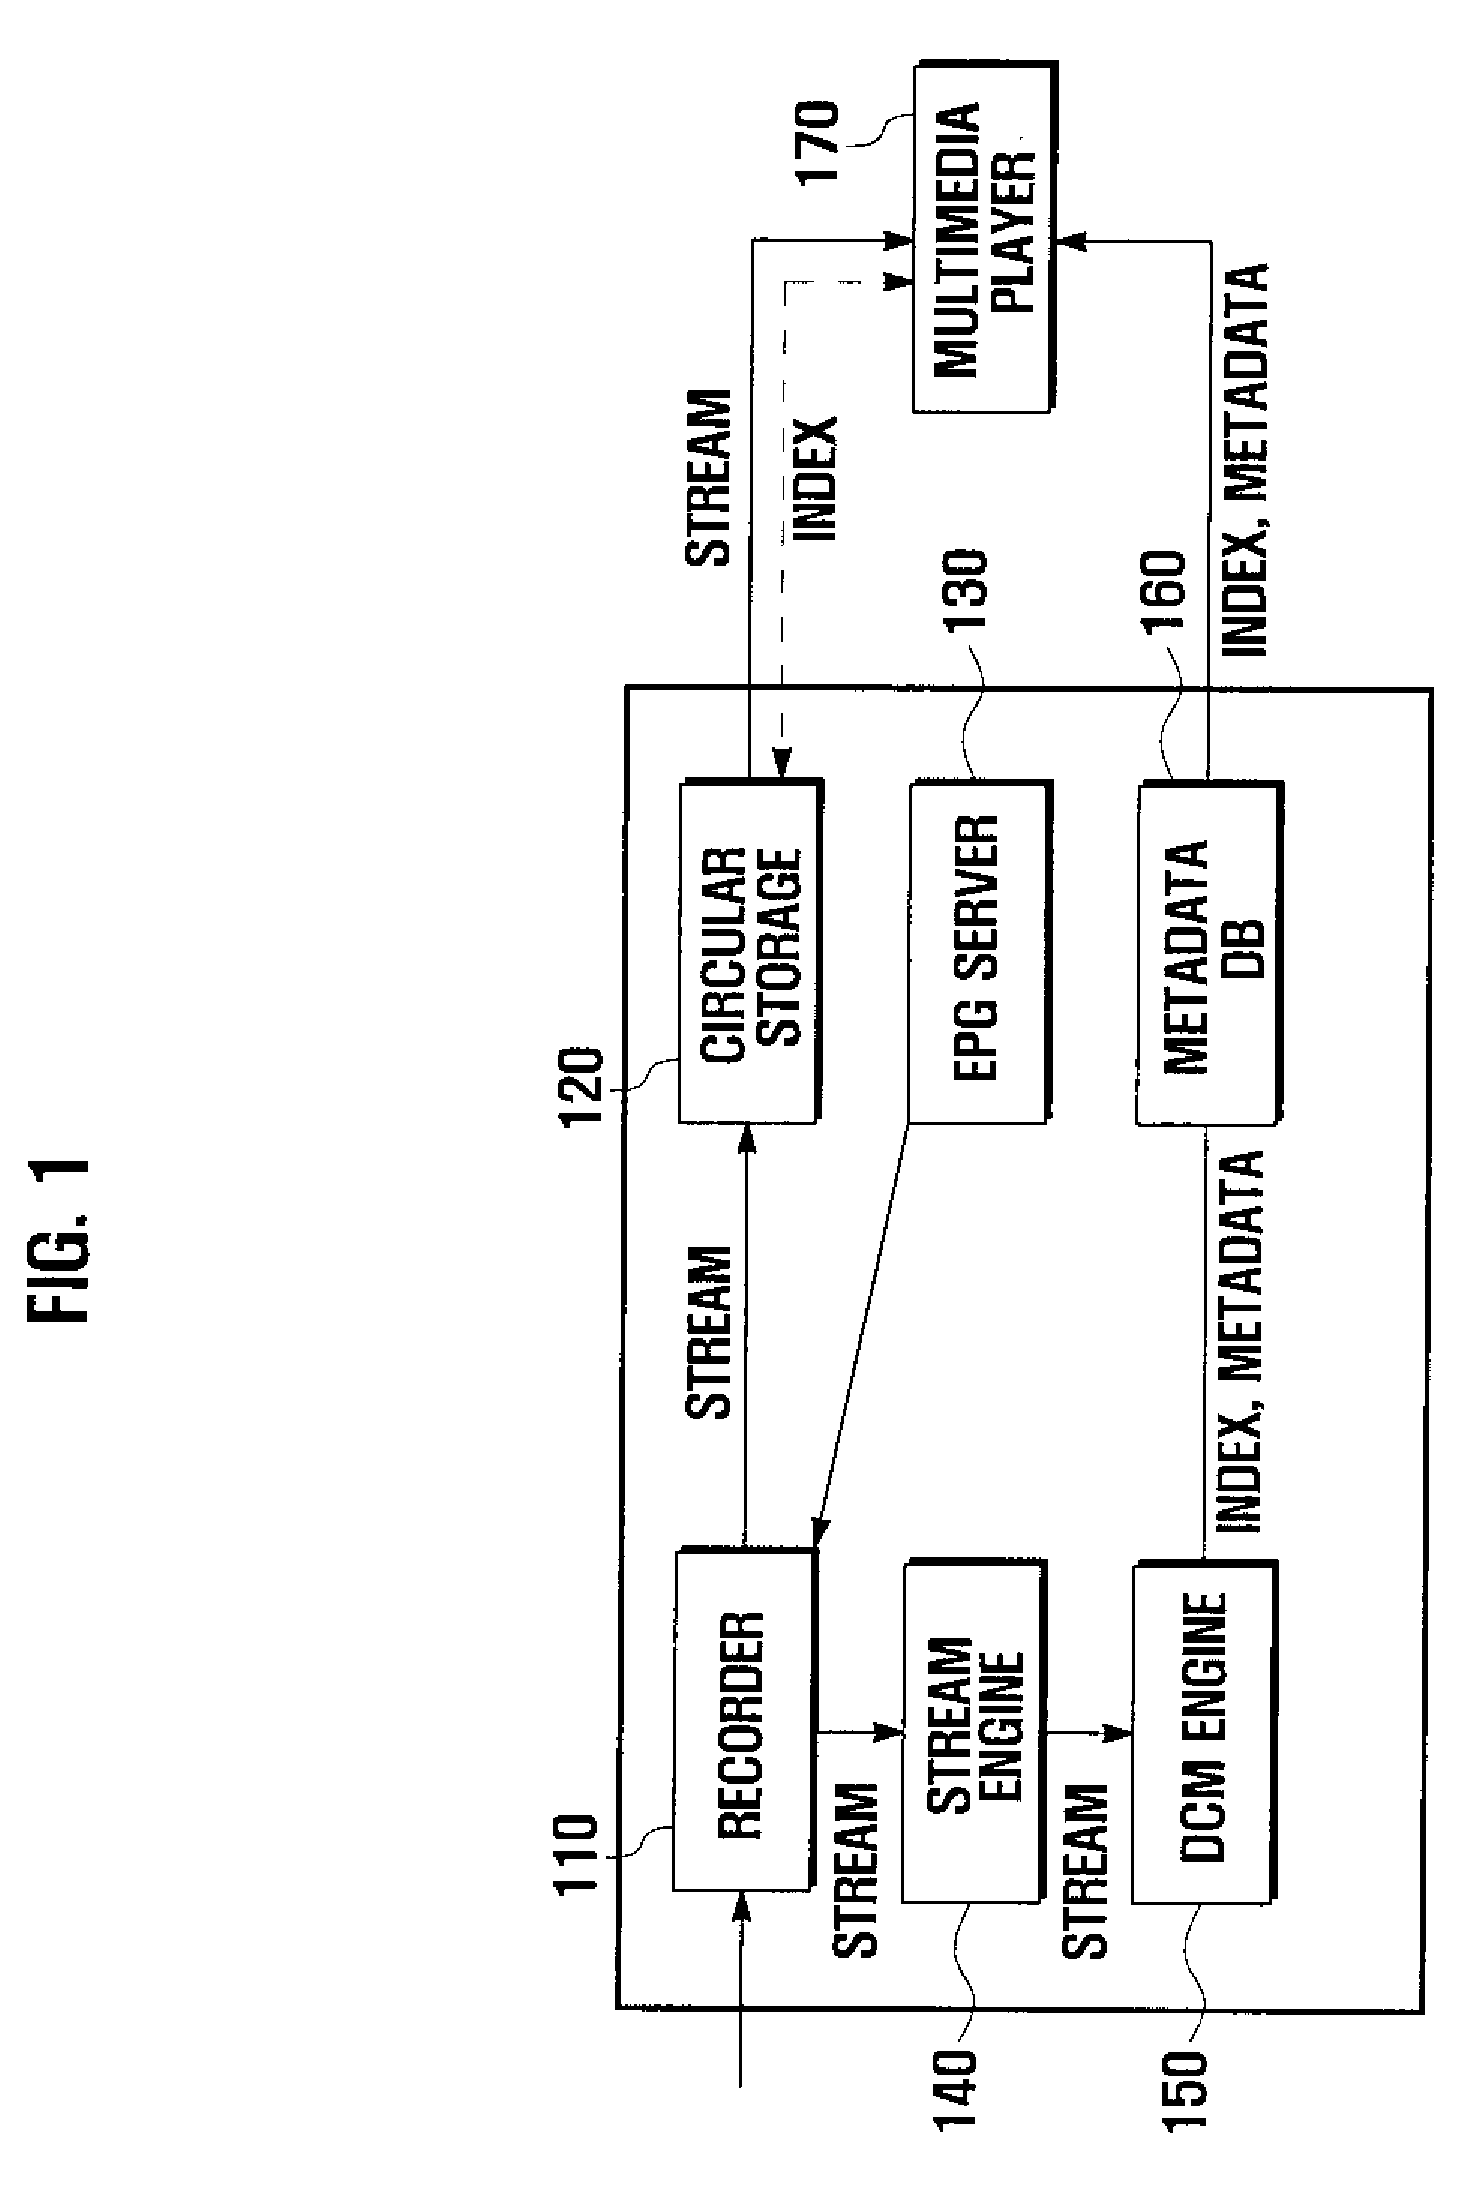 Streaming content management apparatus and method